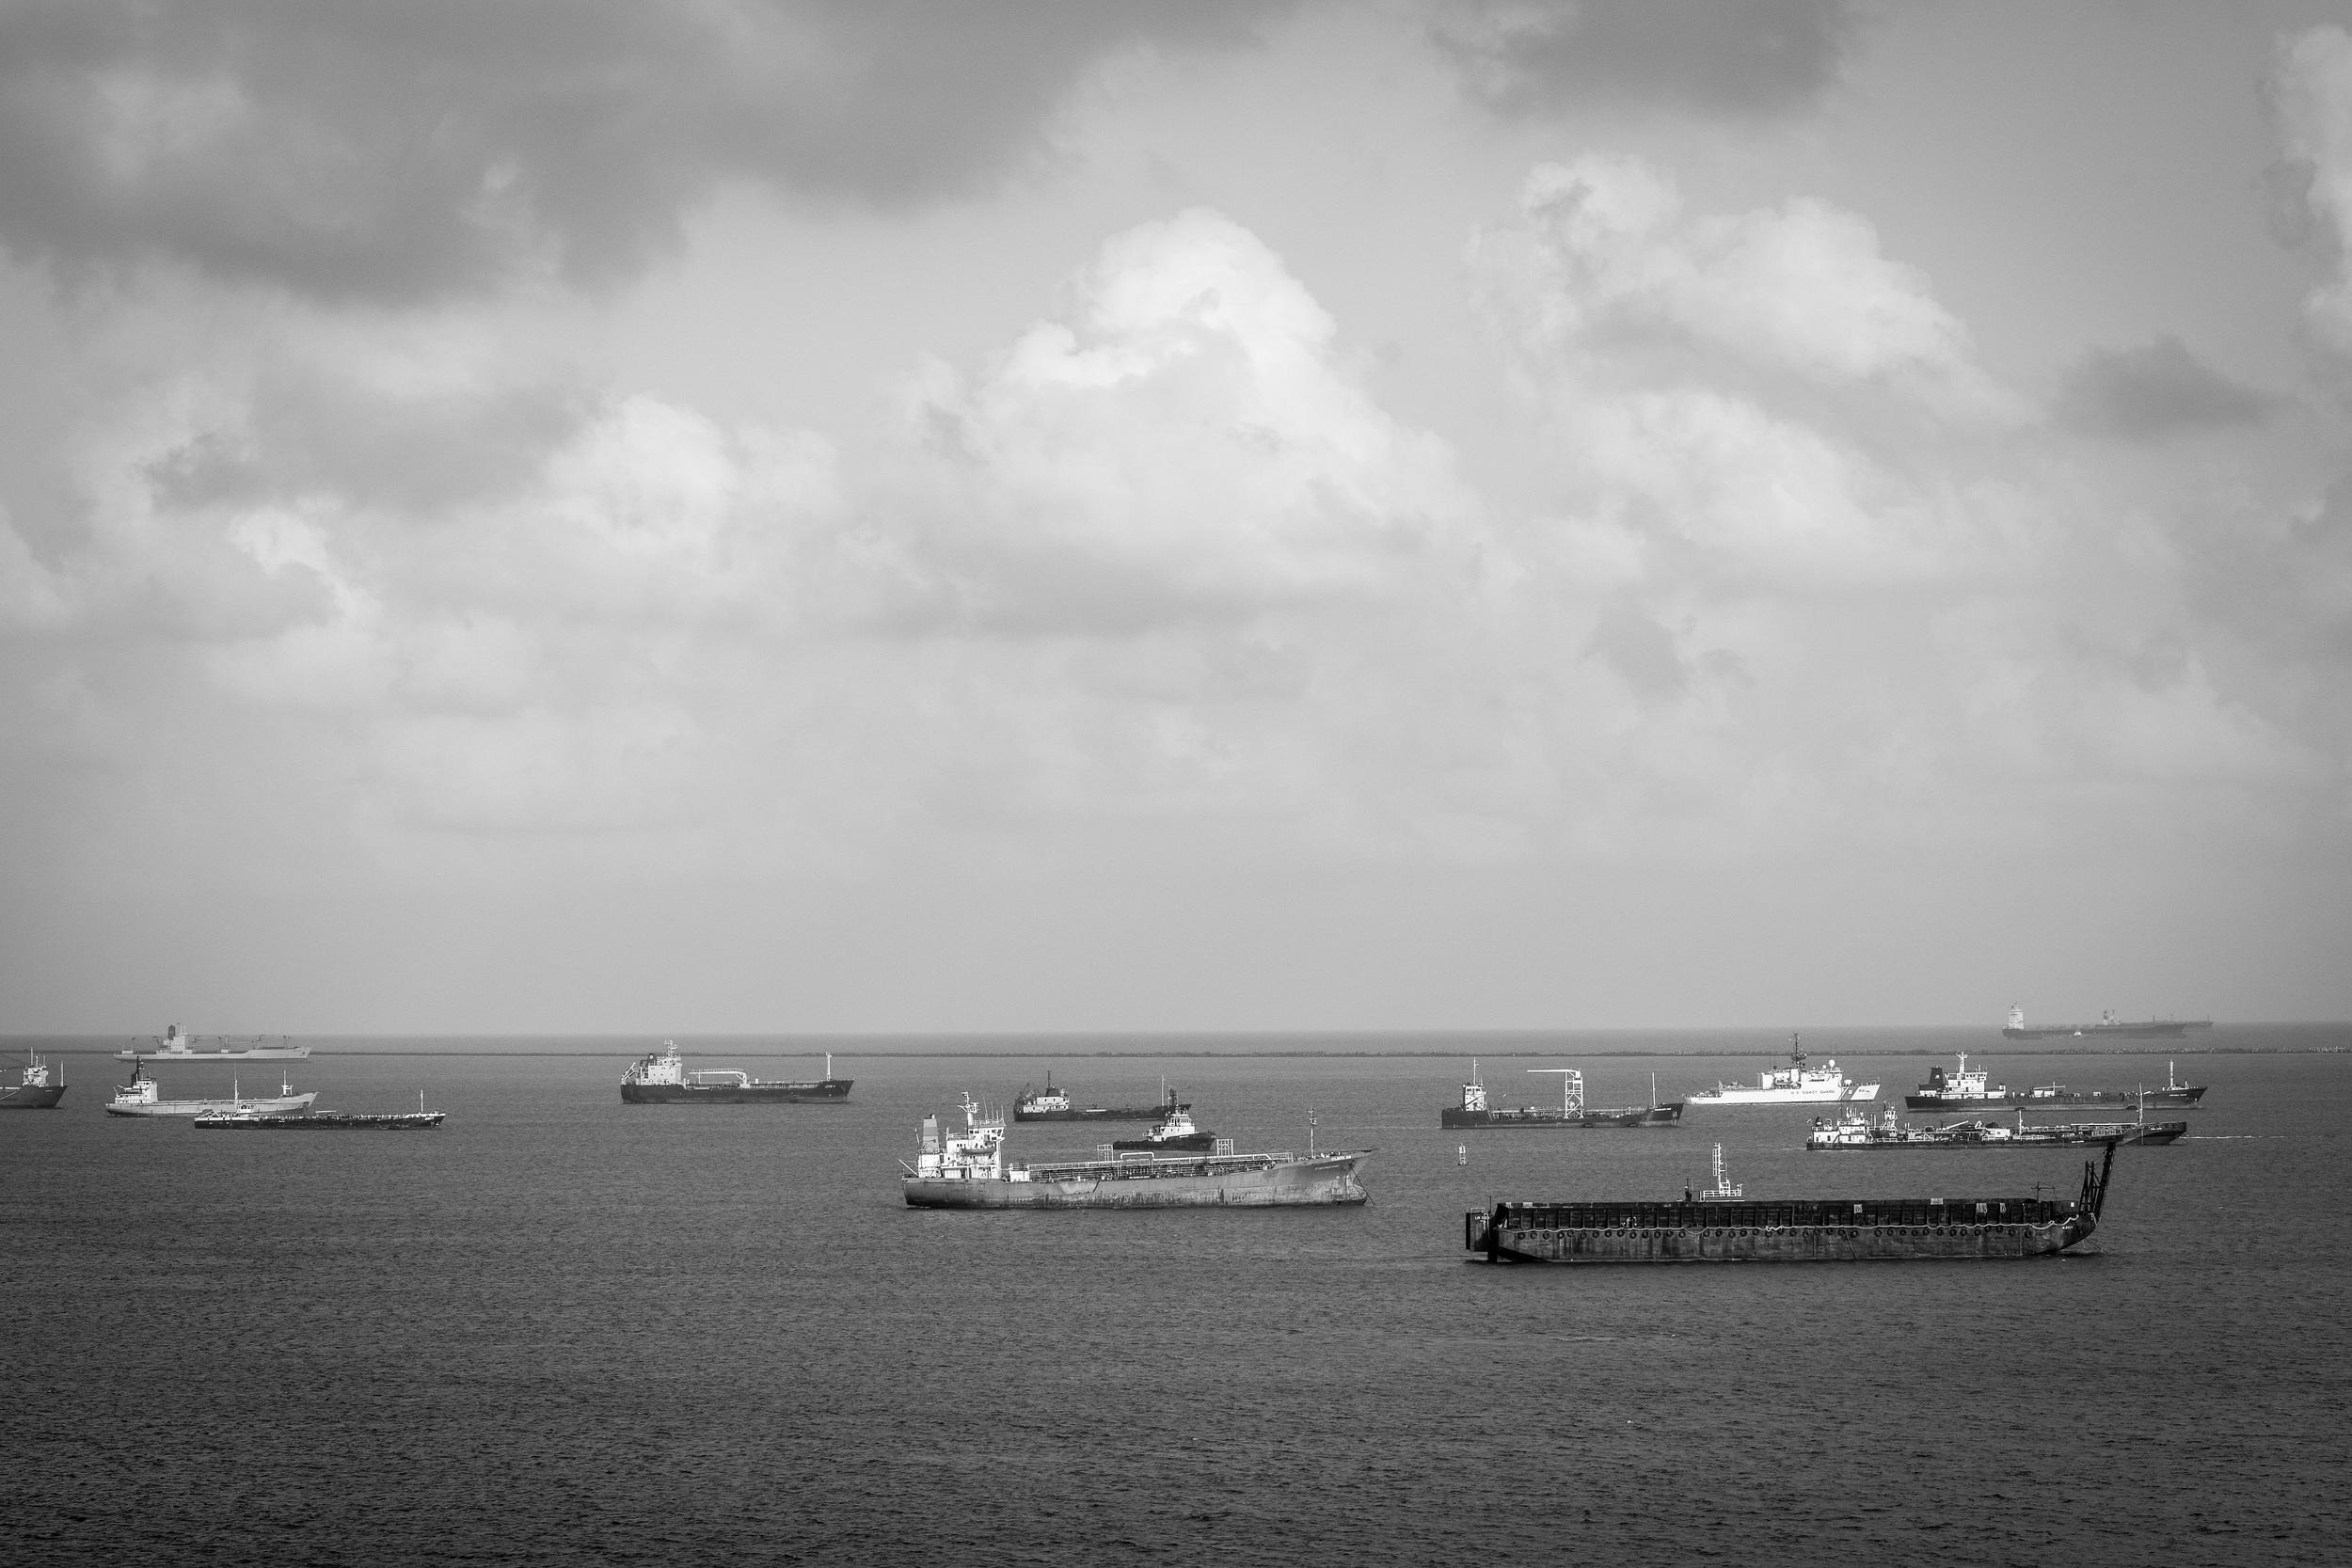 Ships waiting to enter the Panama Canal